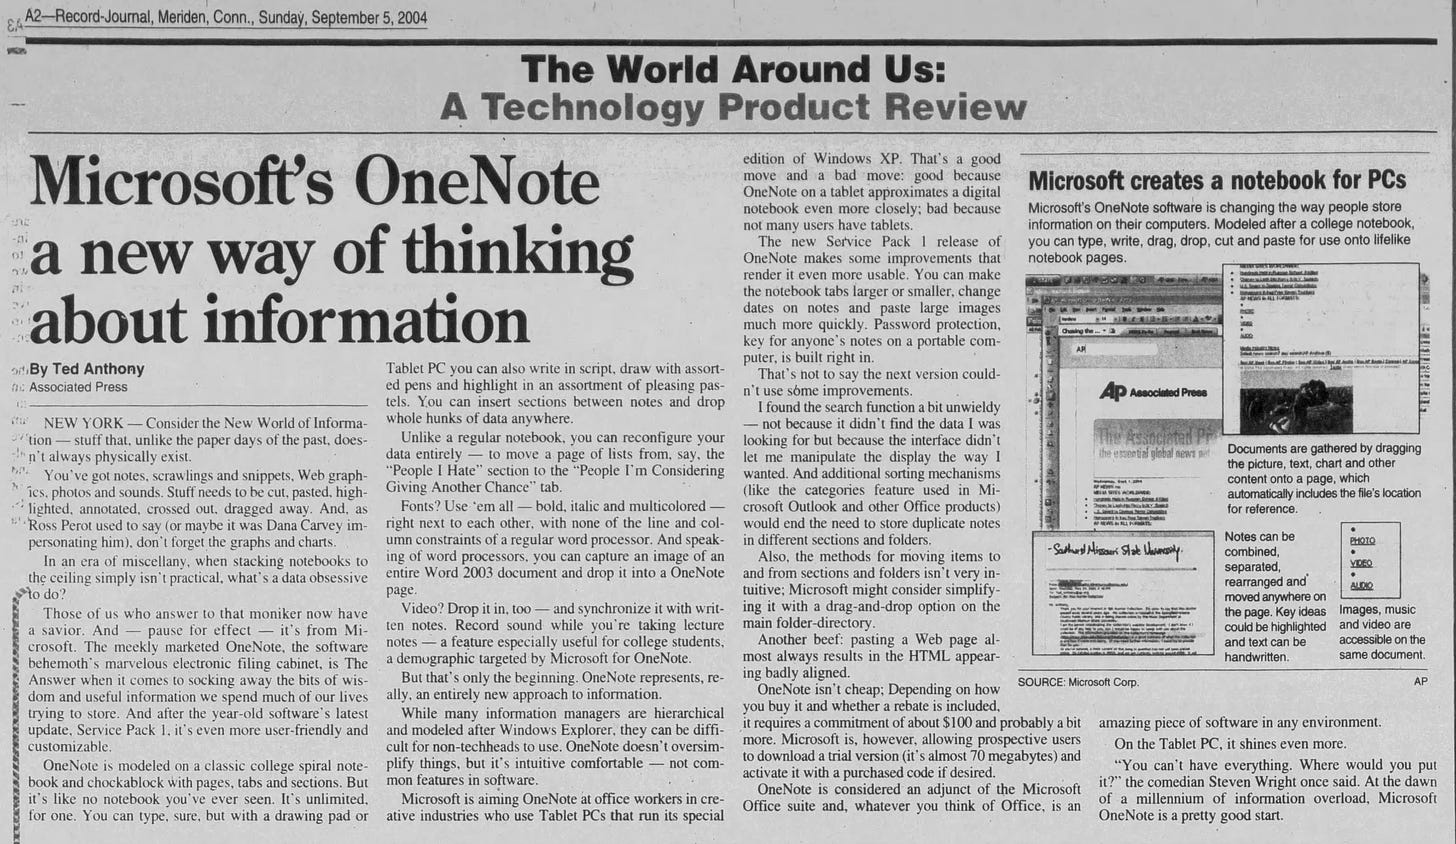 Technology Review (Scanned newspaper article) "Microsoft's OneNote a new way of thinking about information"